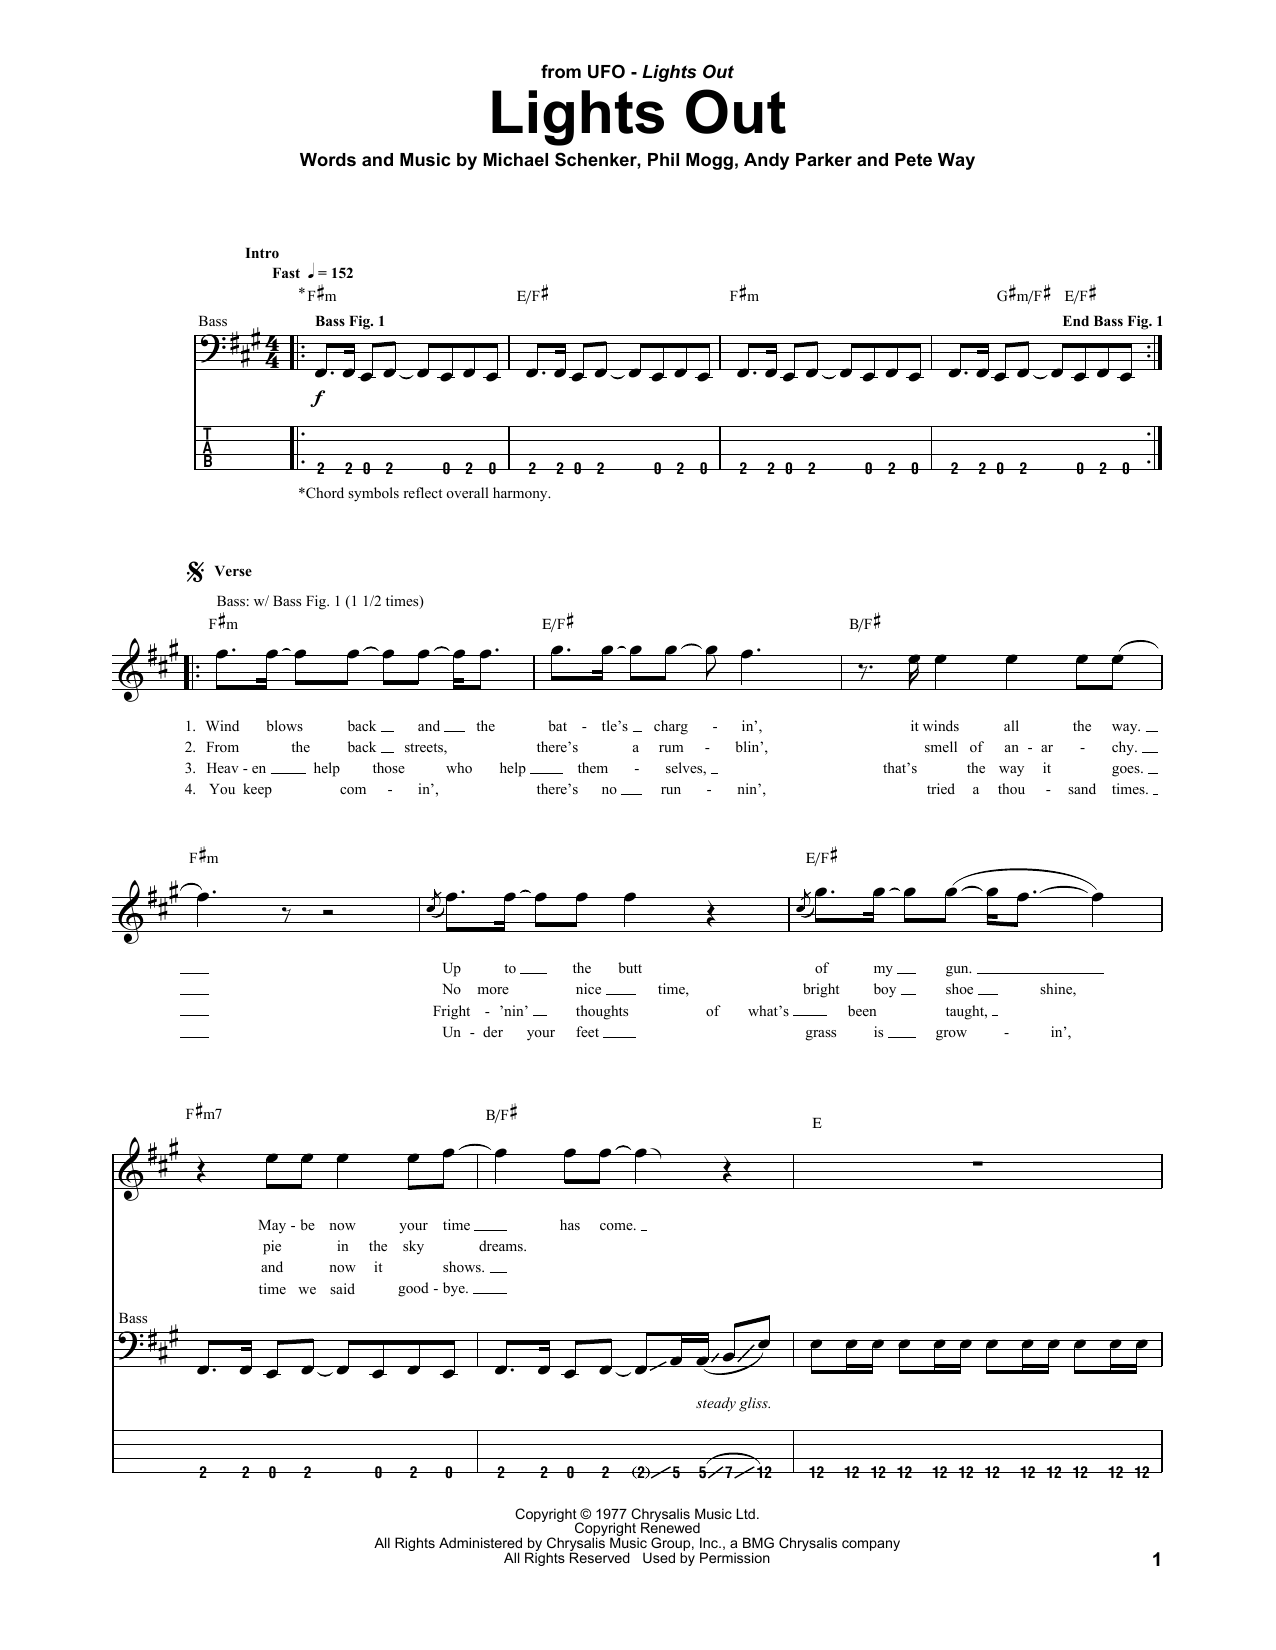 Download UFO Lights Out Sheet Music